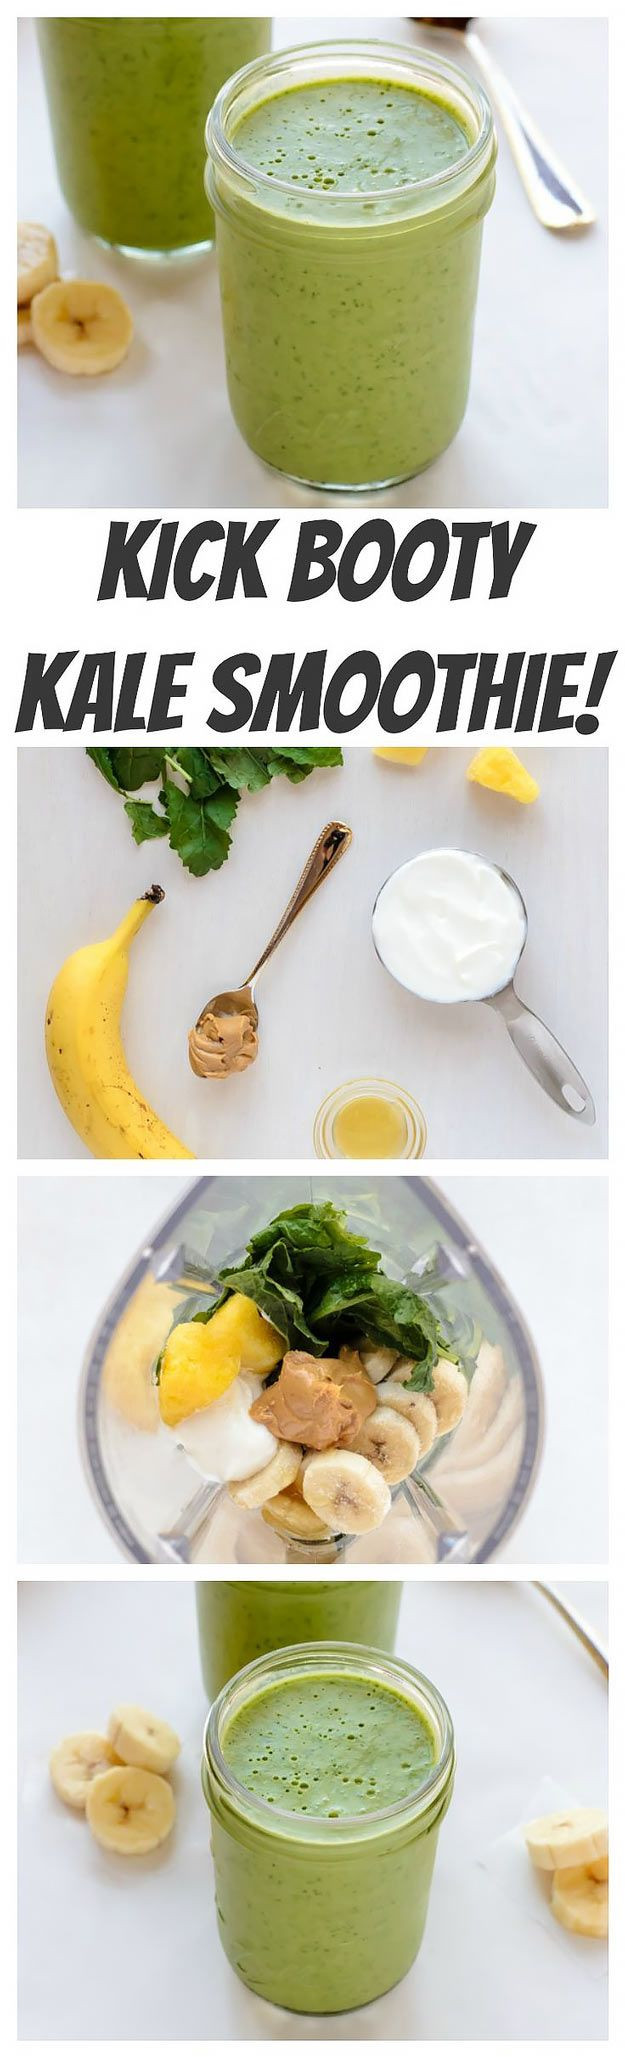 Low Calorie High Protein Smoothies Recipes
 31 Healthy Smoothie Recipes Simply Smoothies